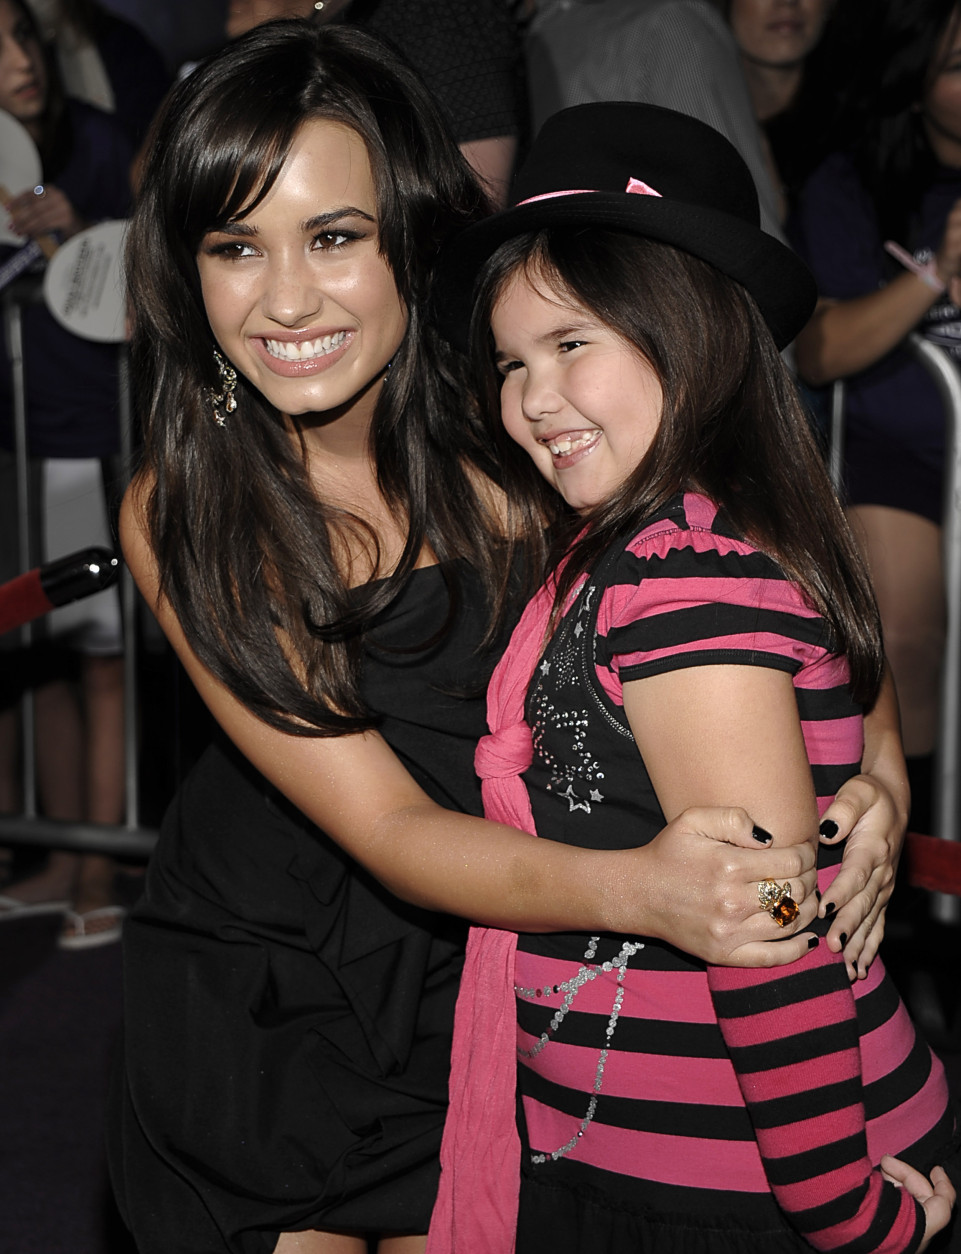 Singer Demi Lovato, left, and her sister, actress Madison De La Garza pose on the press line at the premiere of "Jonas Brothers: The 3D Concert Experience" in Hollywood, Calif. on Tuesday, Feb. 24, 2009. (AP Photo/Dan Steinberg)